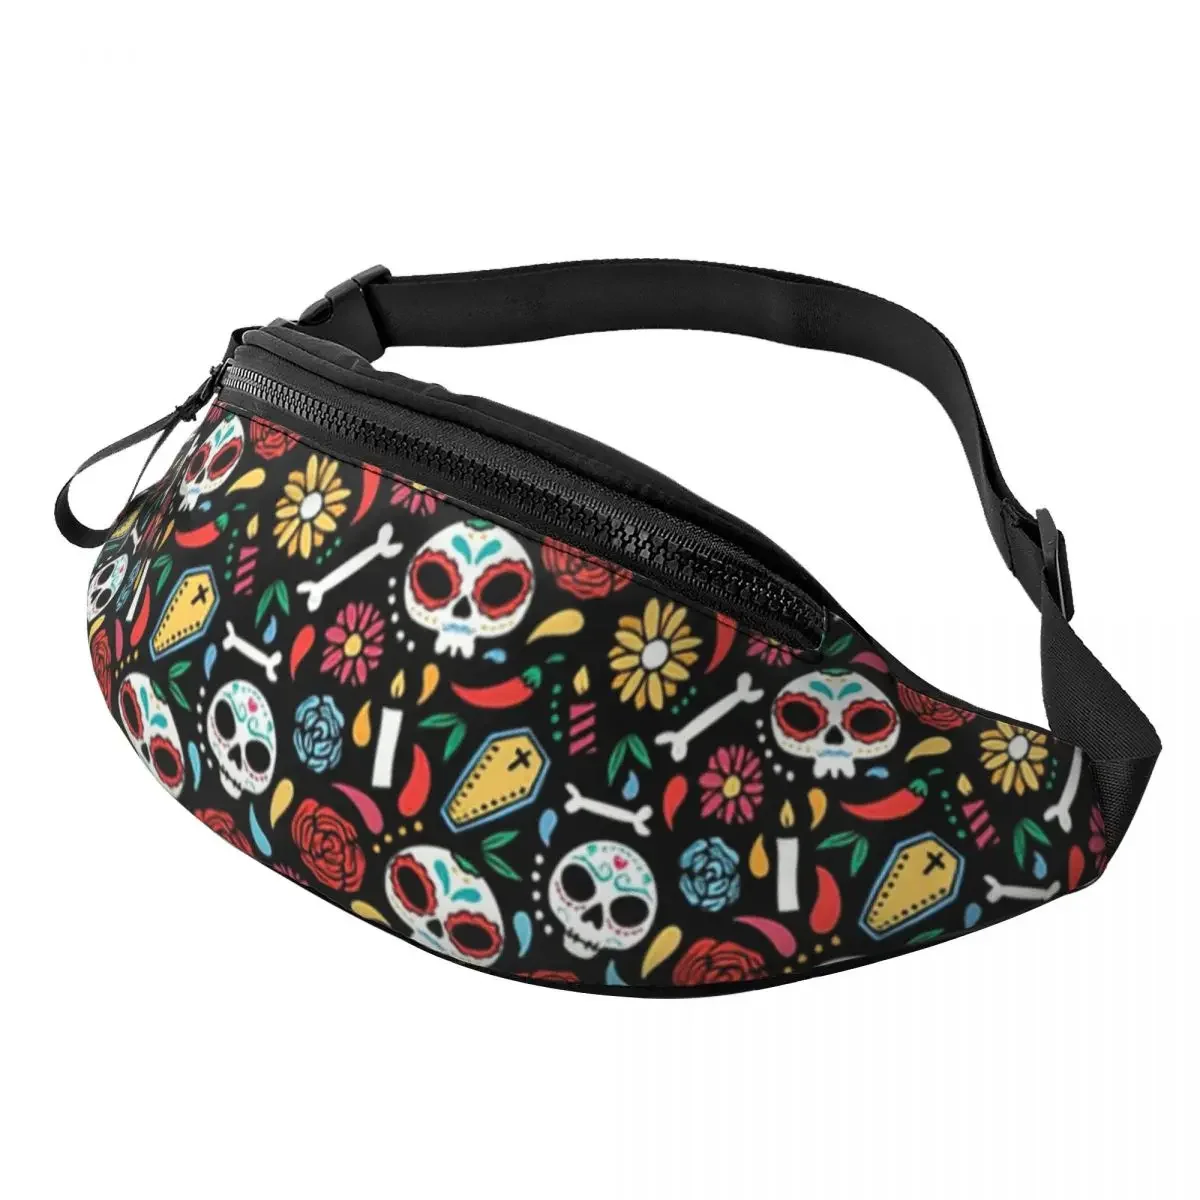 

Casual Mexican Flower Candy Skulls Fanny Pack Women Men Crossbody Waist Bag for Travel Cycling Phone Money Pouch